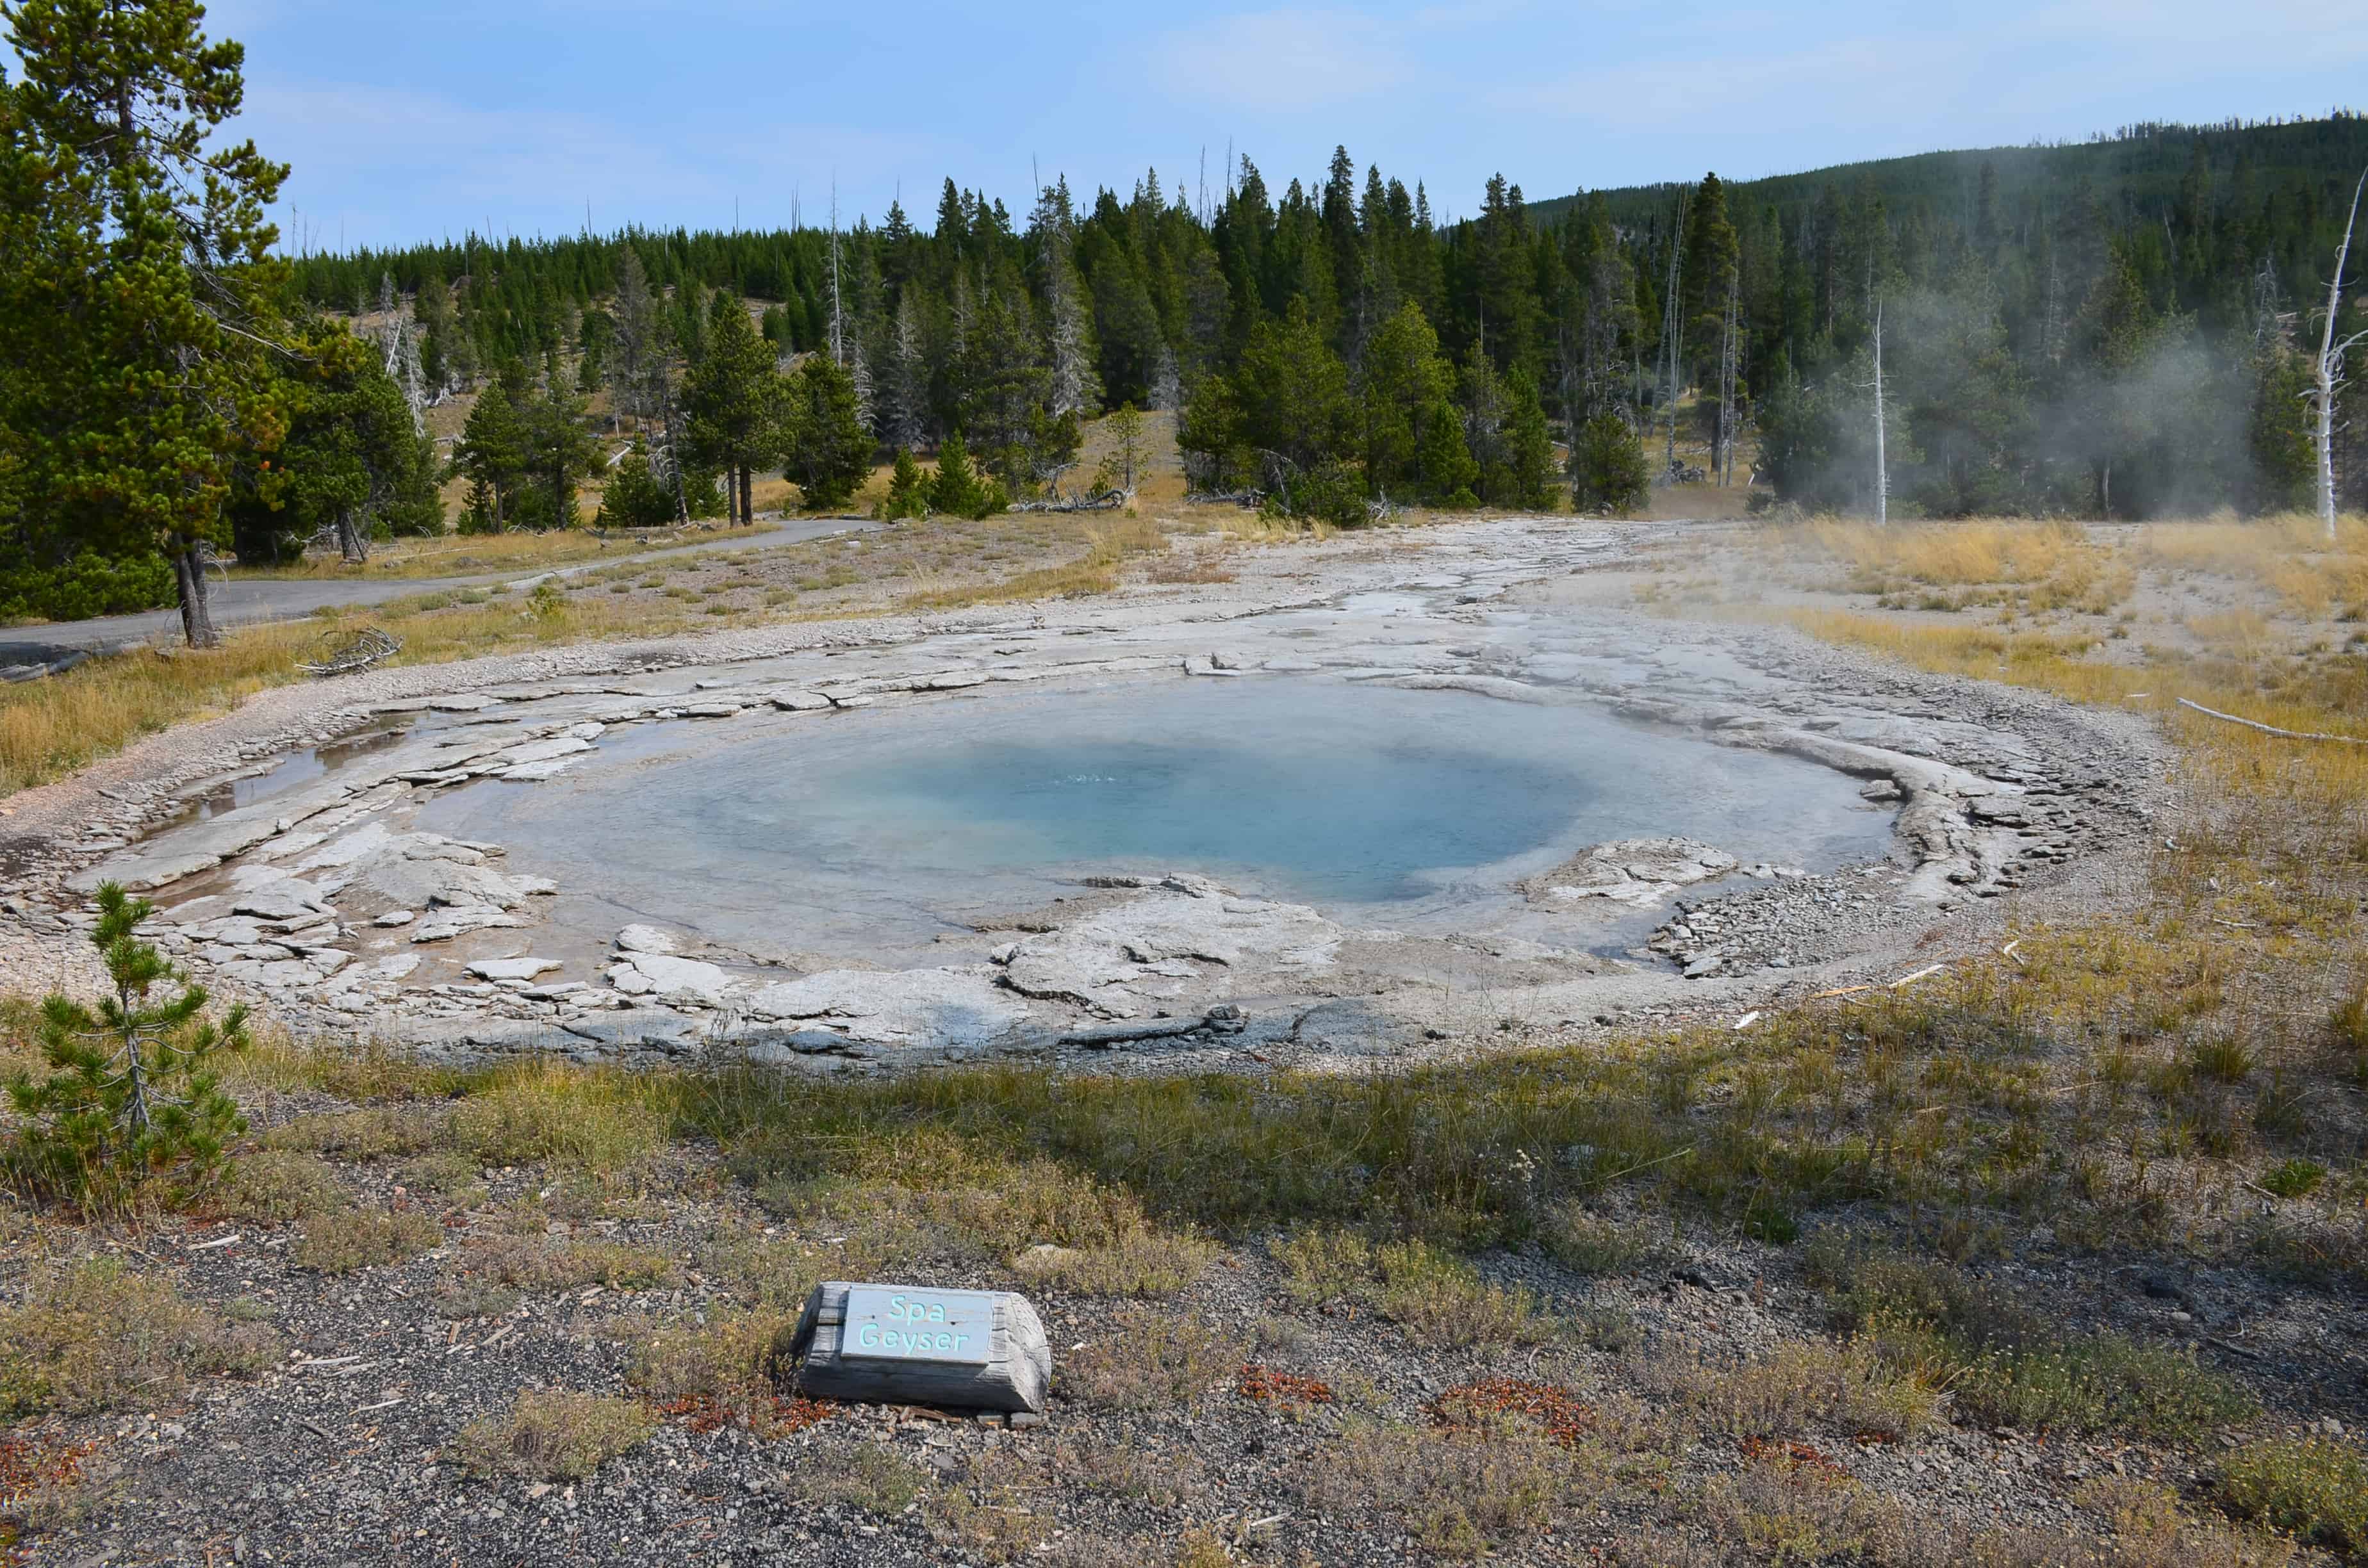 Spa Geyser at the Upper Geyser Basin in Yellowstone National Park, Wyoming